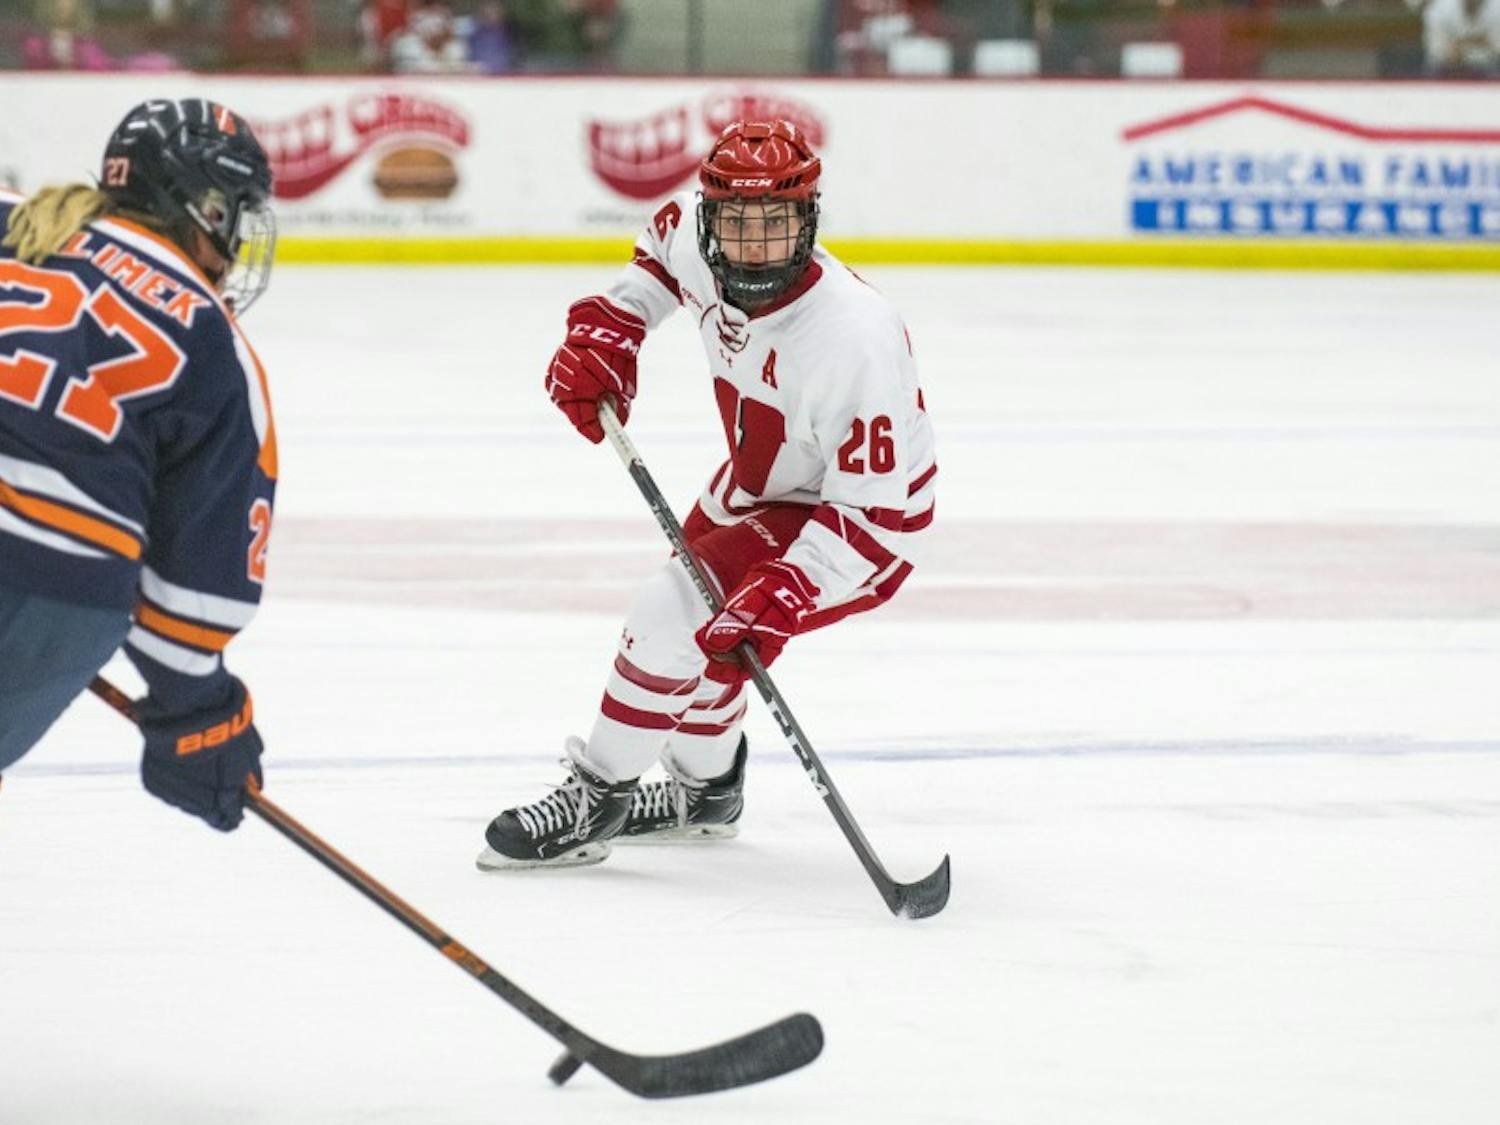 Senior forward Emily Clark scored three times on the weekend to help Wisconsin tighten its grip on the WCHA regular-season title.